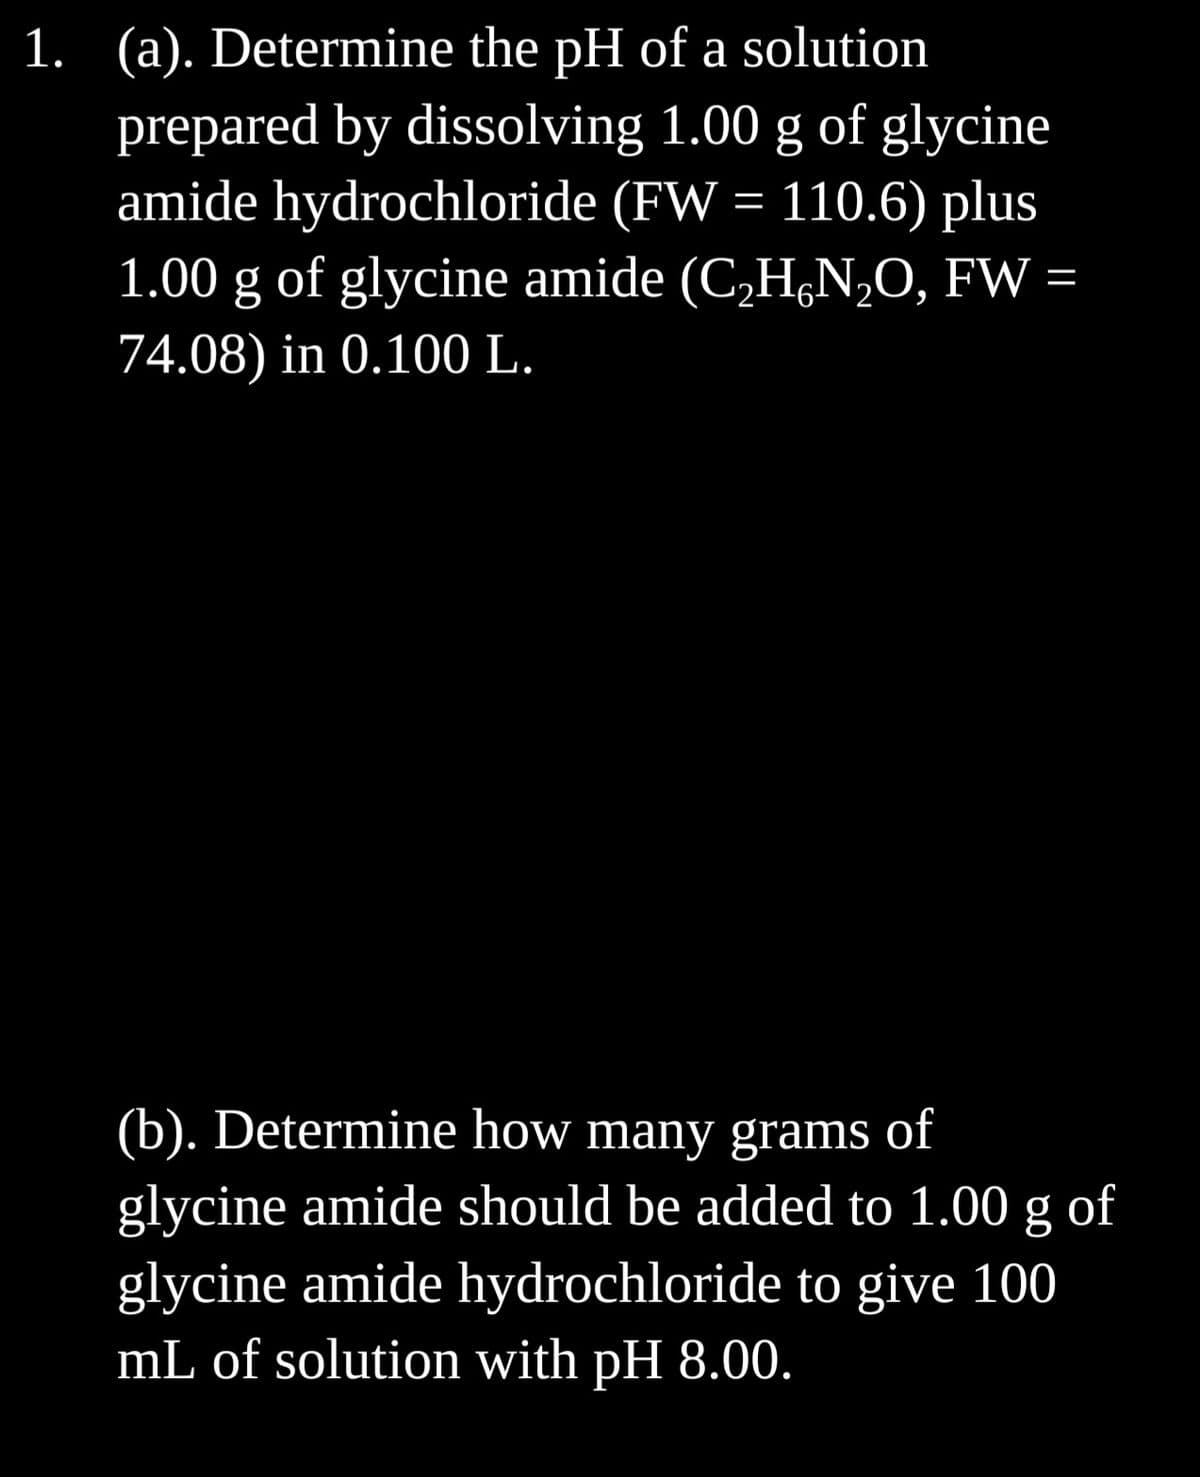 1. (a). Determine the pH of a solution
prepared by dissolving 1.00 g of glycine
amide hydrochloride (FW = 110.6) plus
1.00 g of glycine amide (C₂HN₂O, FW =
74.08) in 0.100 L.
(b). Determine how many grams of
glycine amide should be added to 1.00 g of
glycine amide hydrochloride to give 100
mL of solution with pH 8.00.